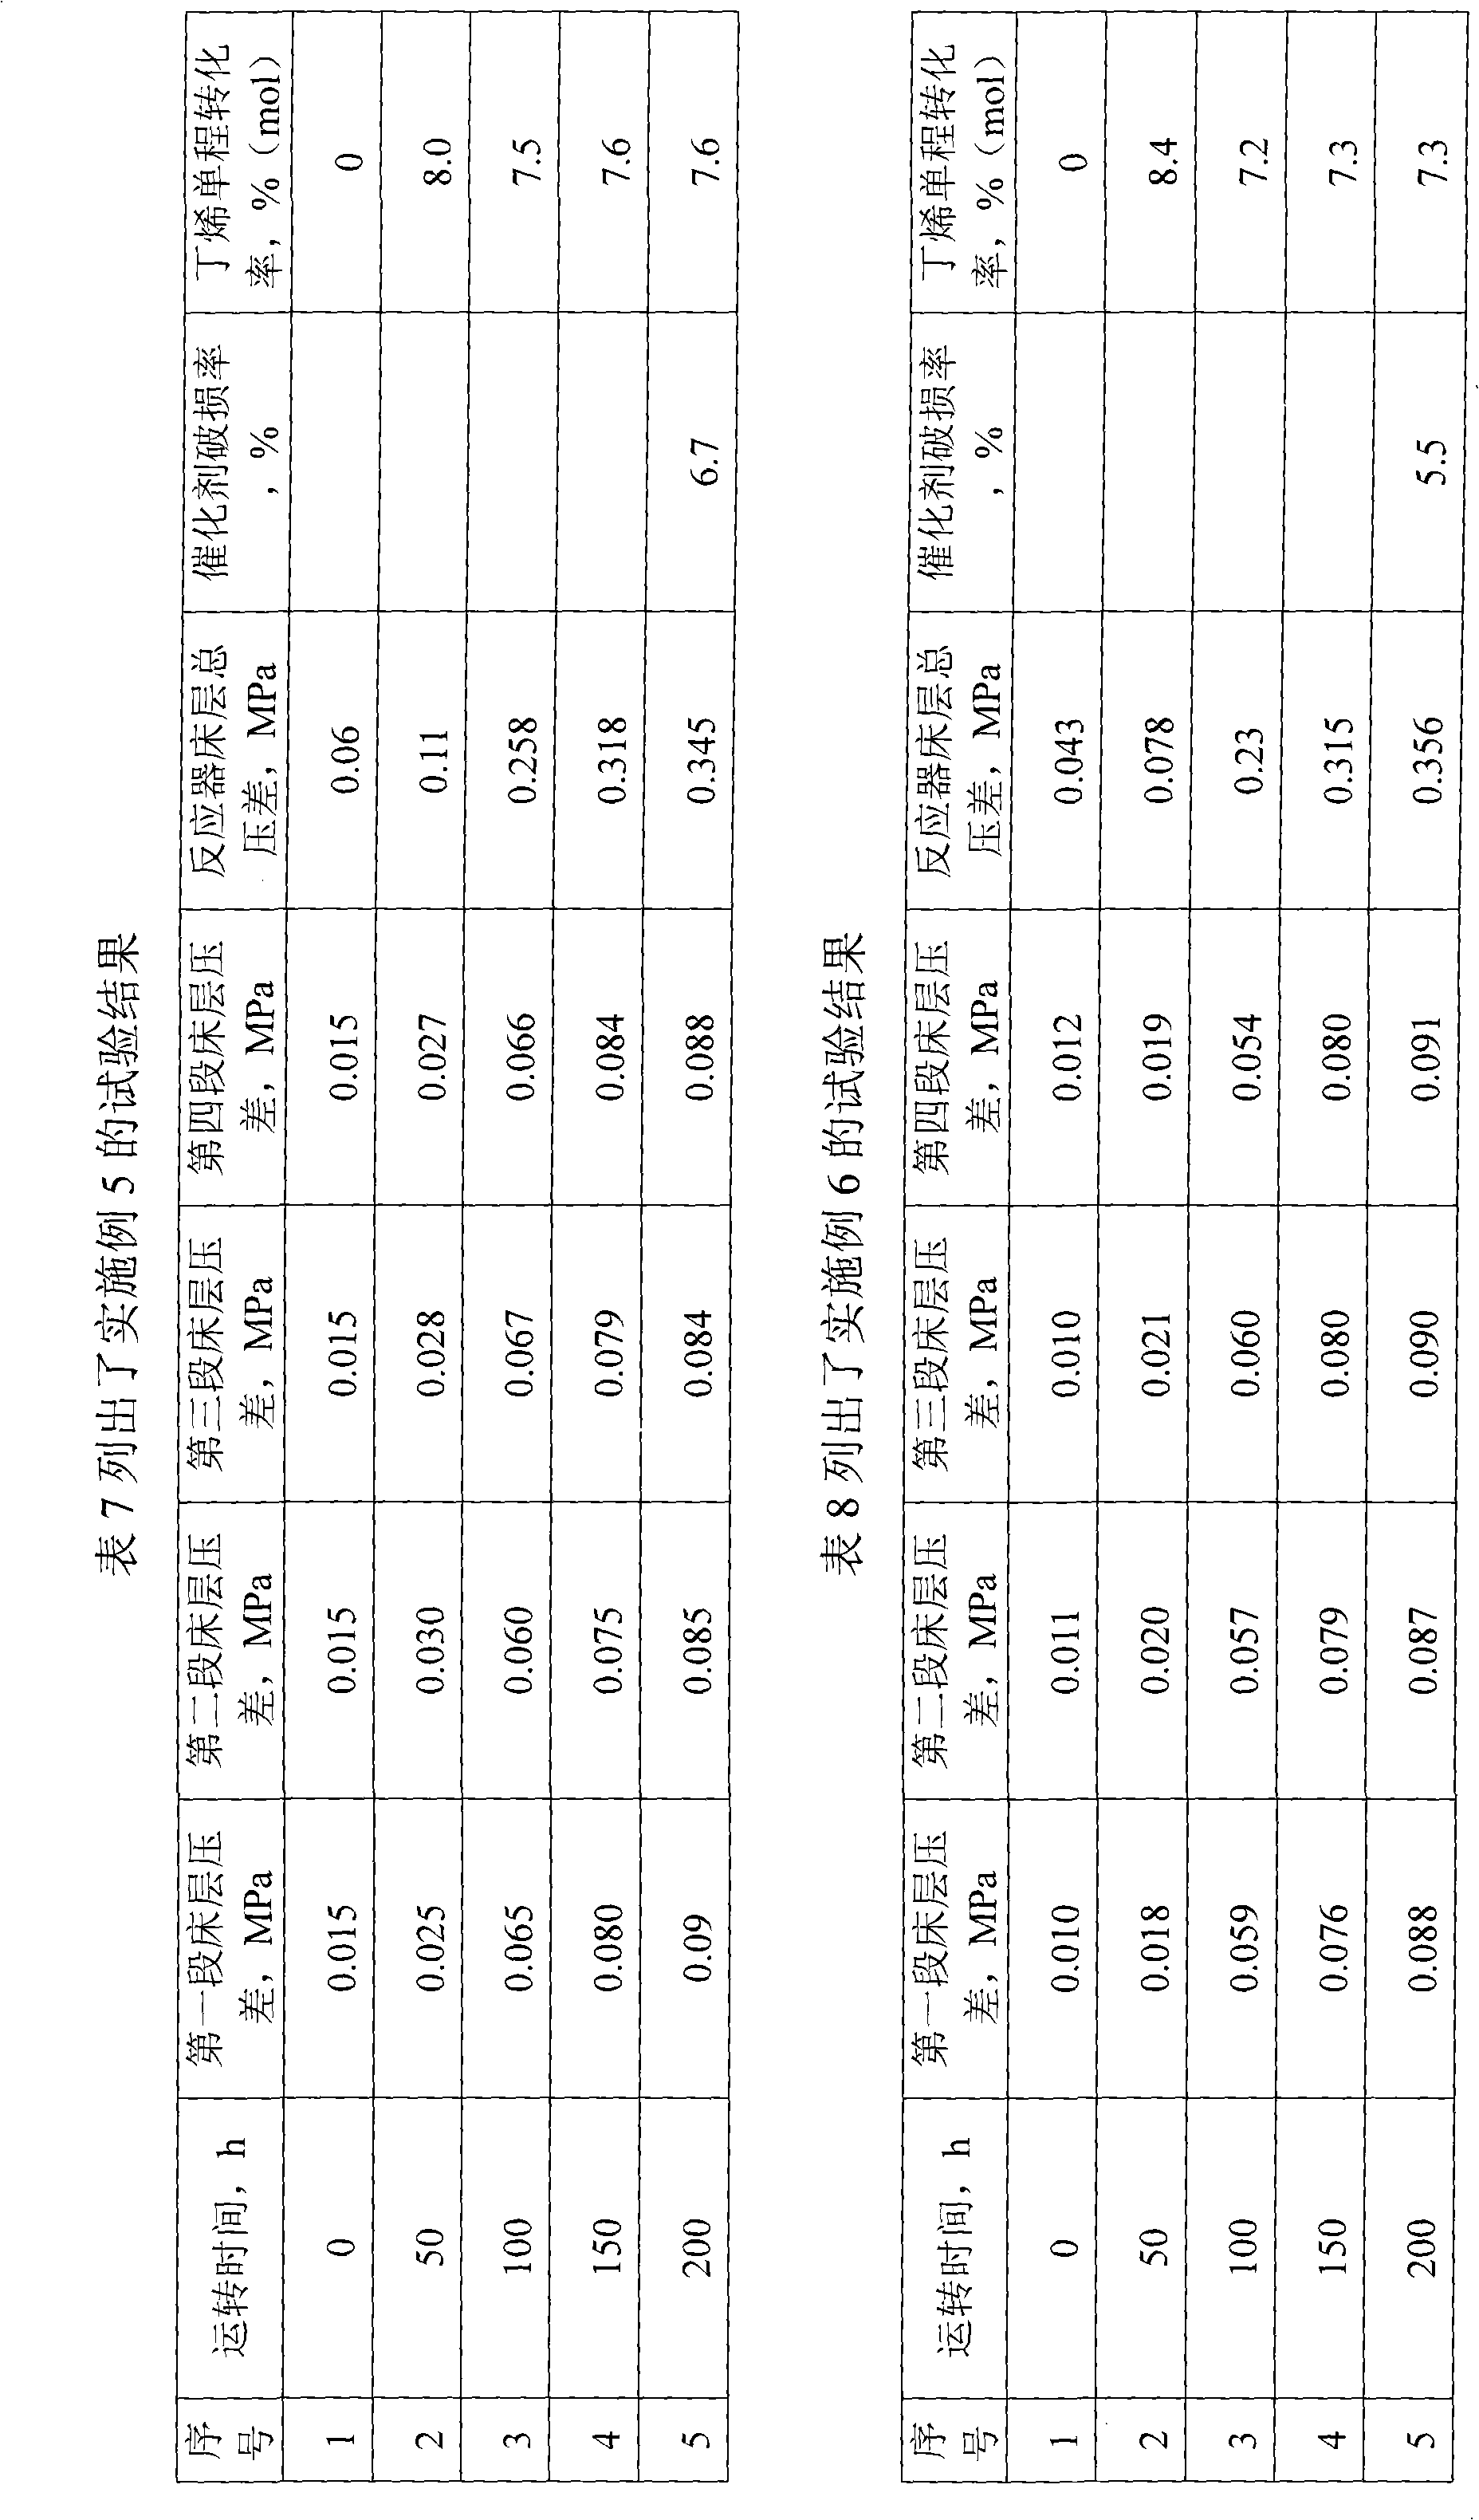 Packing method of hydrated resin catalyst